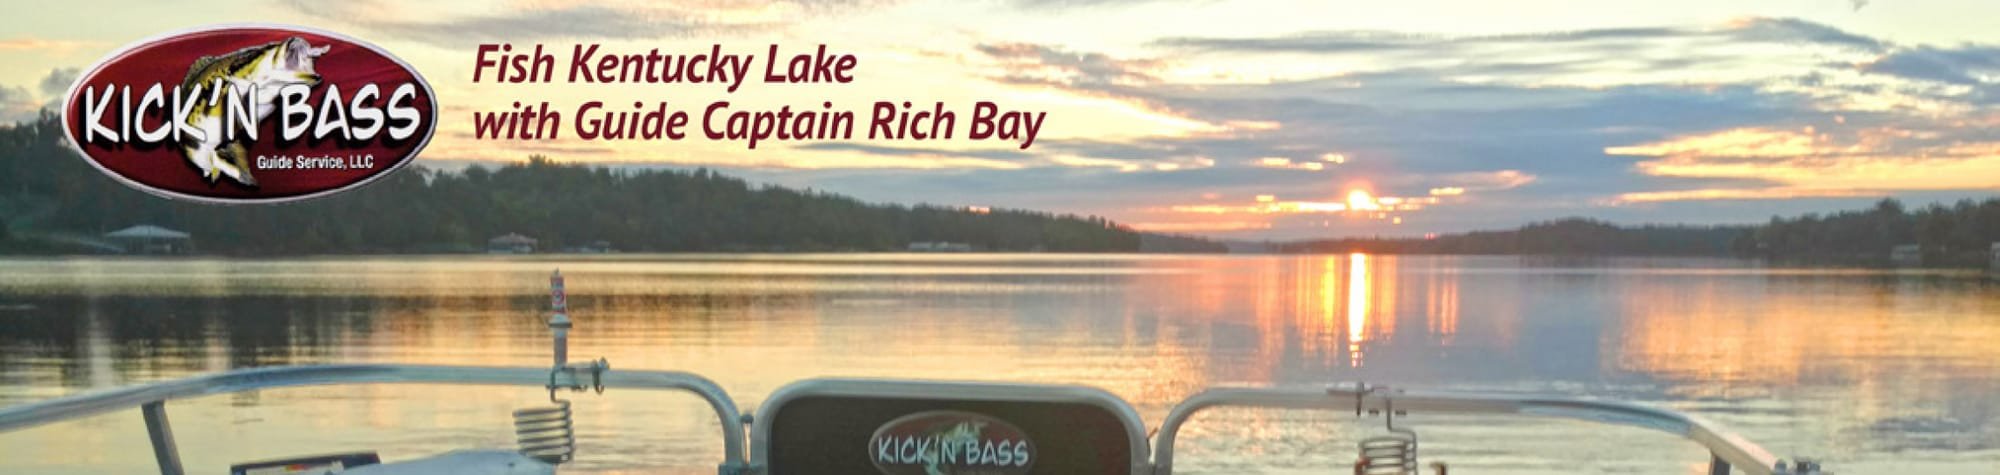 Your Kick'n Bass Fishing Report for April 24, 2019